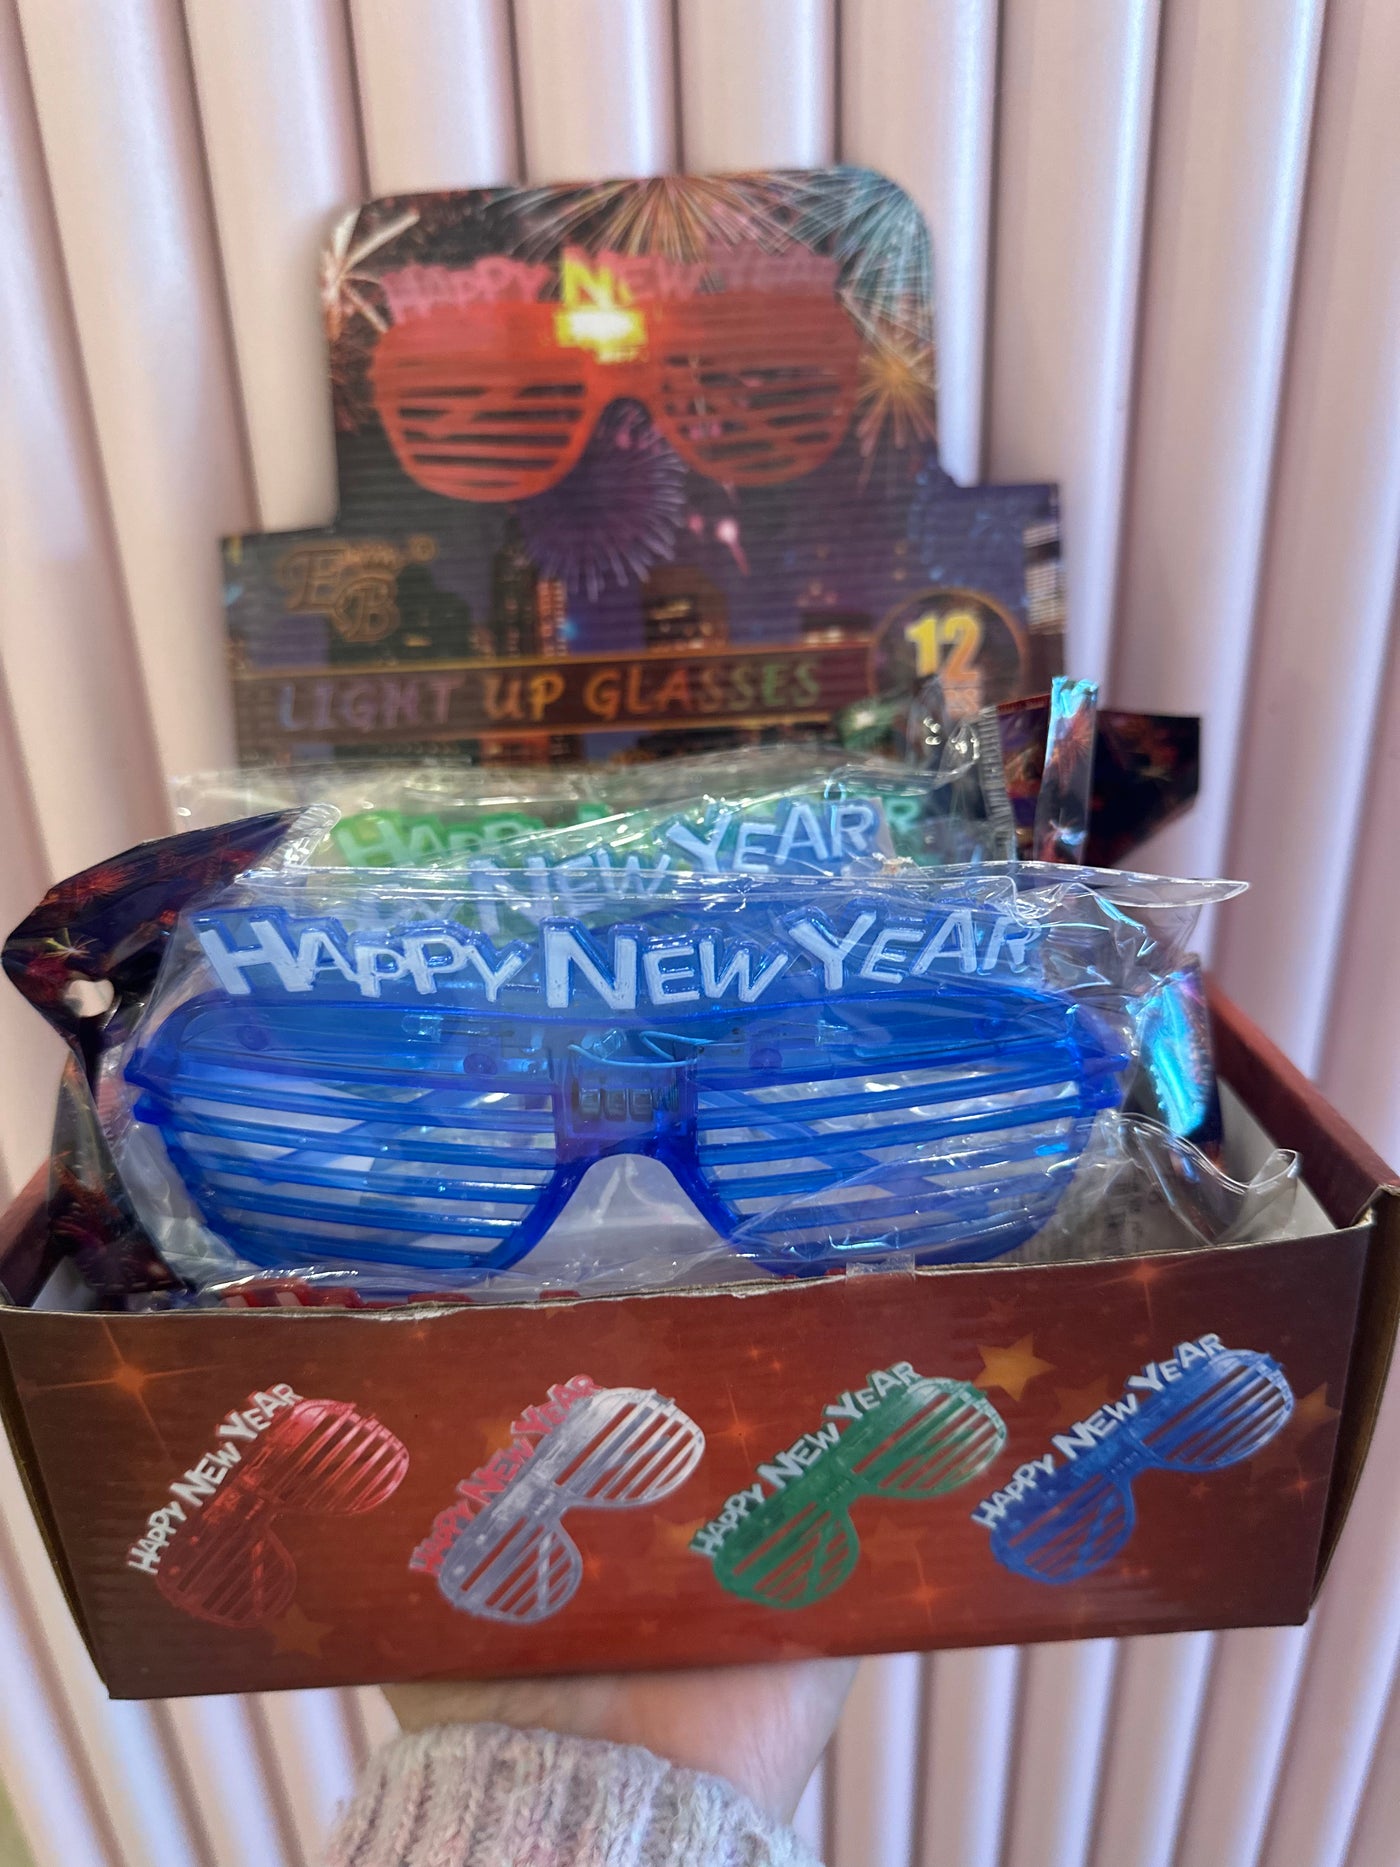 Happy New Year Light Up Glasses